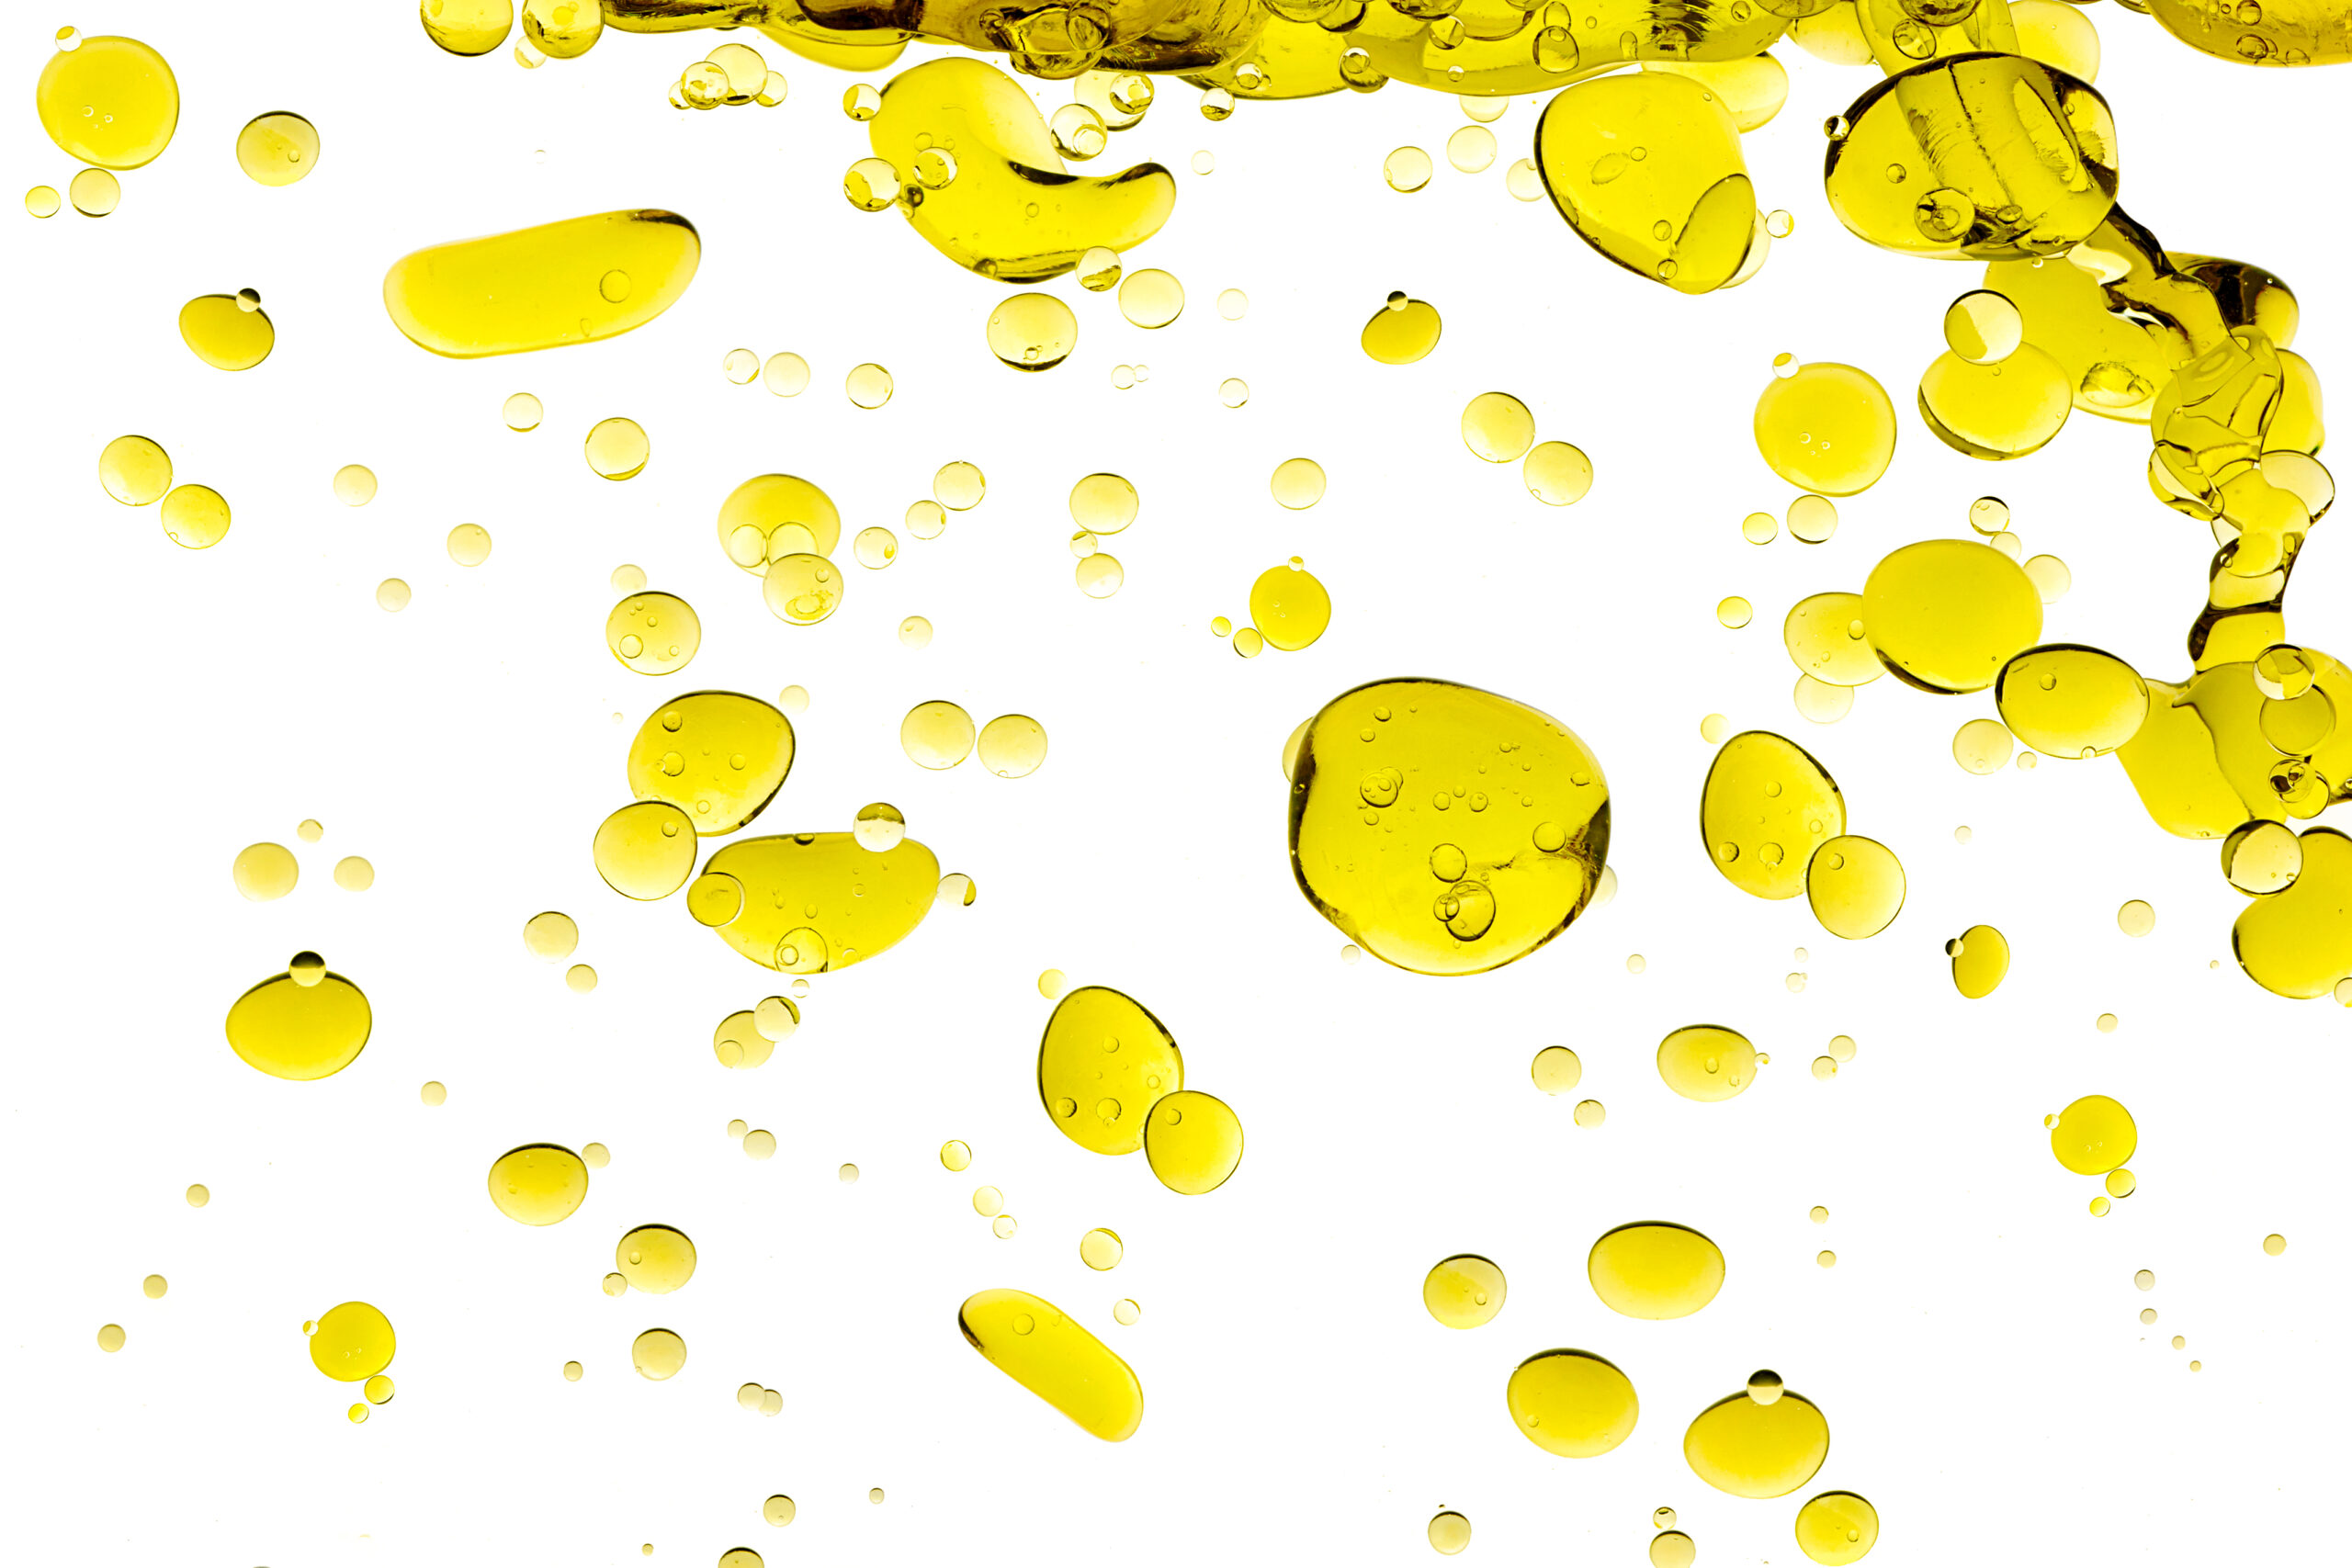 What are emulsifiers and what are common examples used in food?